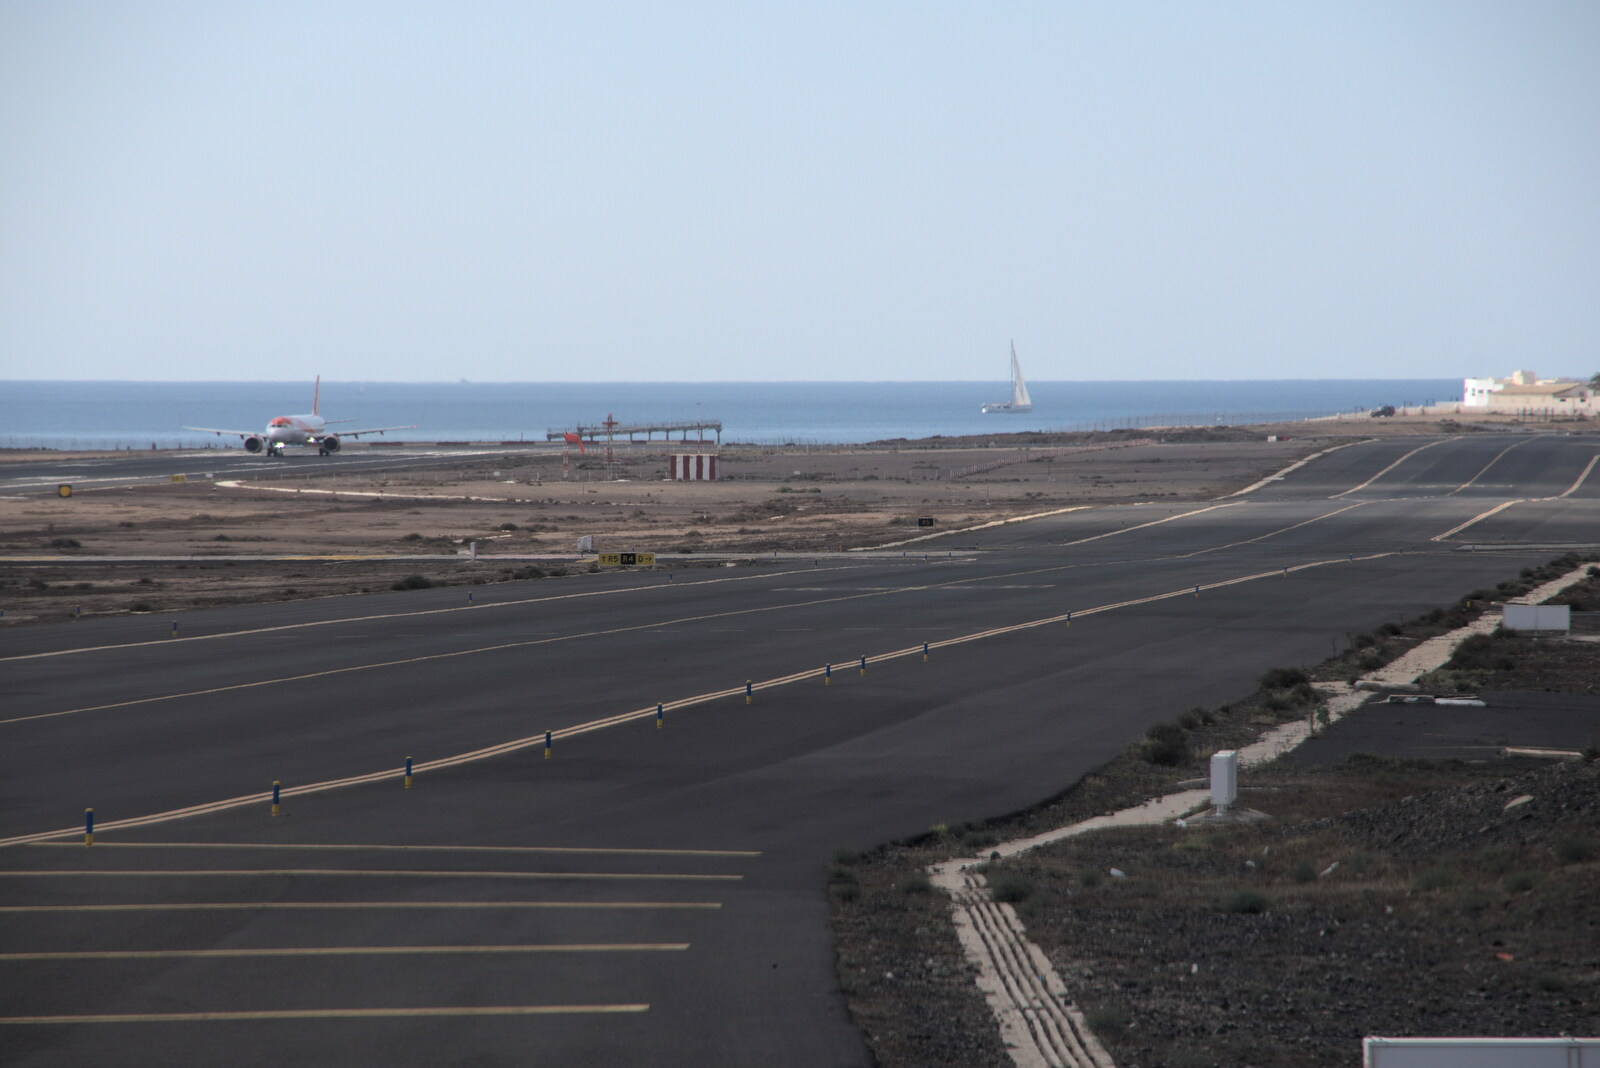 The wibbly-wobbly runway of Arrecife from The Volcanoes of Lanzarote, Canary Islands, Spain - 27th October 2021